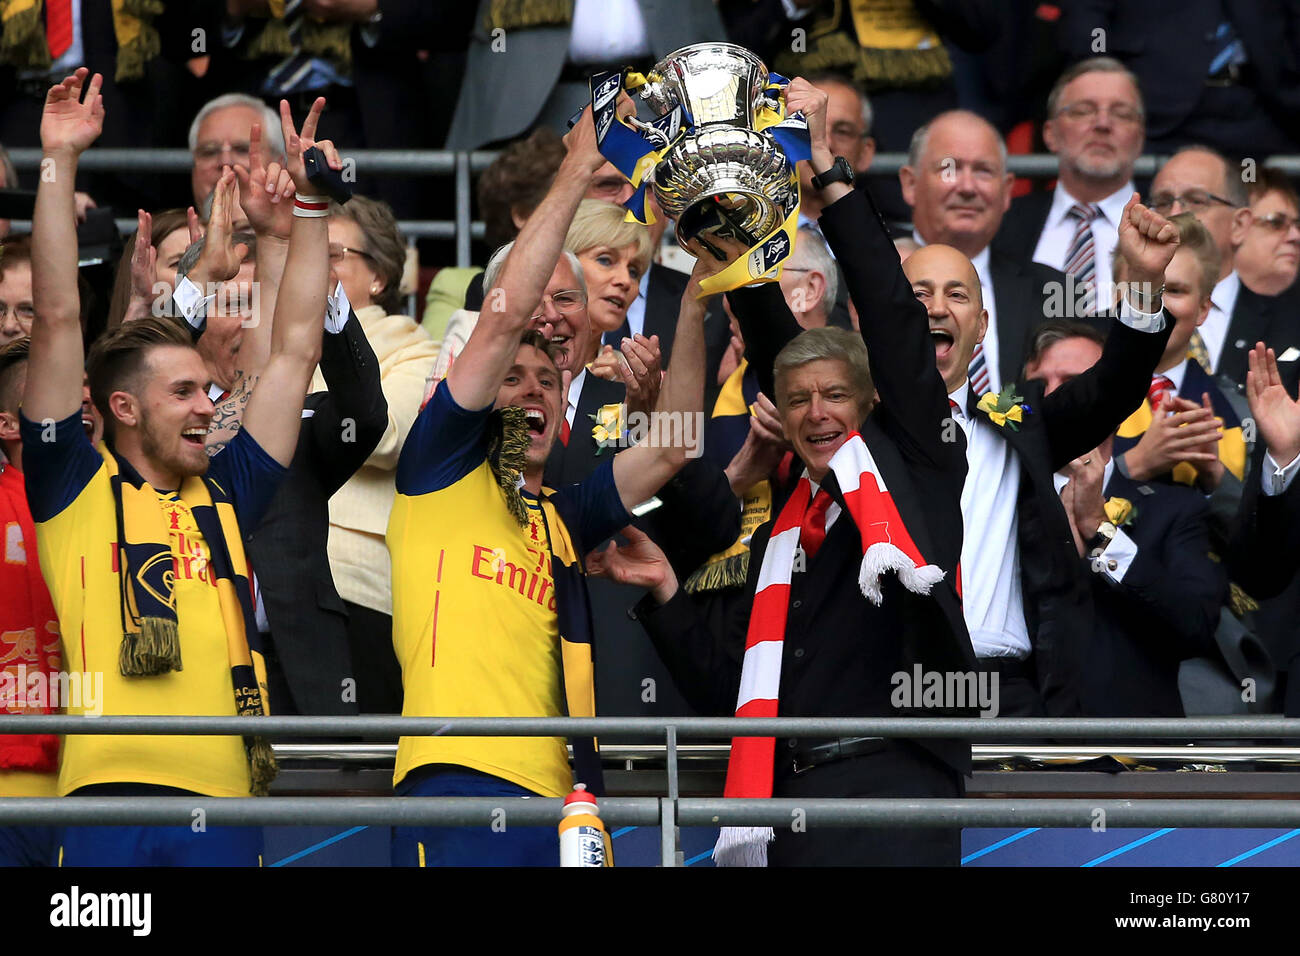 Arsenal's Nacho Monreal (centre left) and manager Arsene Wenger (centre right) celebrate with the trophy on the Wembley balcony following their victory in the FA Cup Final at Wembley Stadium, London. PRESS ASSOCIATION Photo. Picture date: Saturday May 30, 2015. See PA Story SOCCER FA Cup. Photo credit should read: Nick Potts/PA Wire. RESTRICTIONS: Maximum 45 images during a match. No video emulation or promotion as 'live'. No use in games, competitions, merchandise, betting or single club/player services. No use with unofficial audio, video, data, fixture Stock Photo